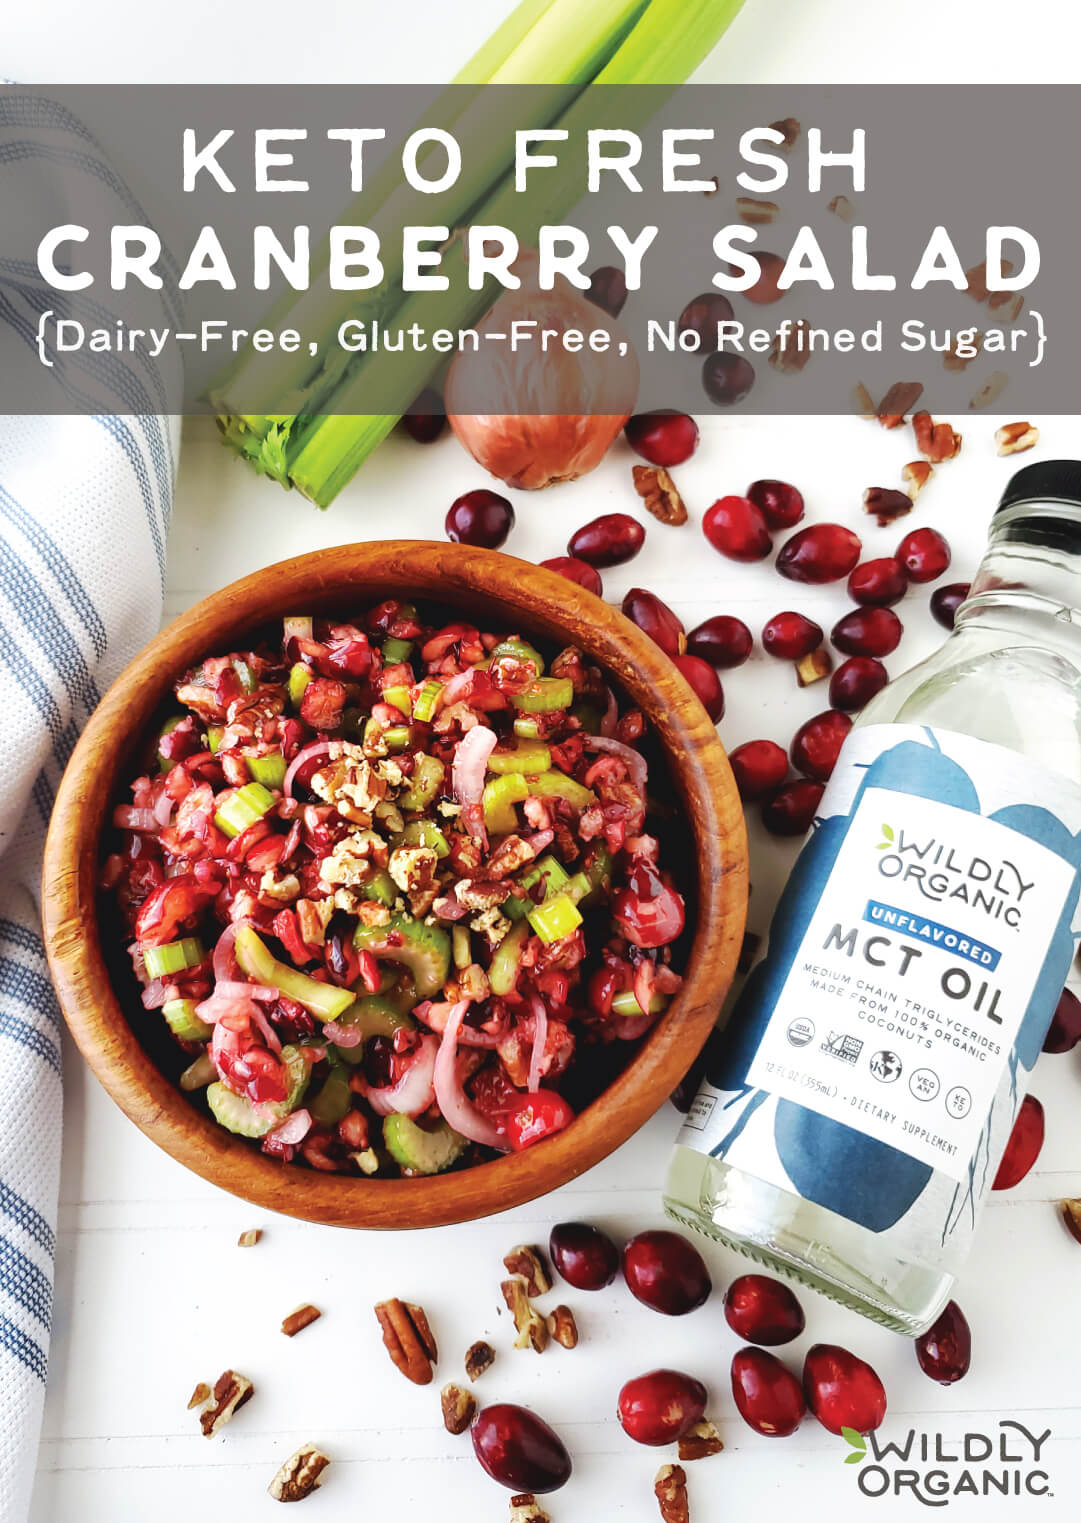 A photo of a bowl of keto fresh cranberry salad with celery and MCT oil.